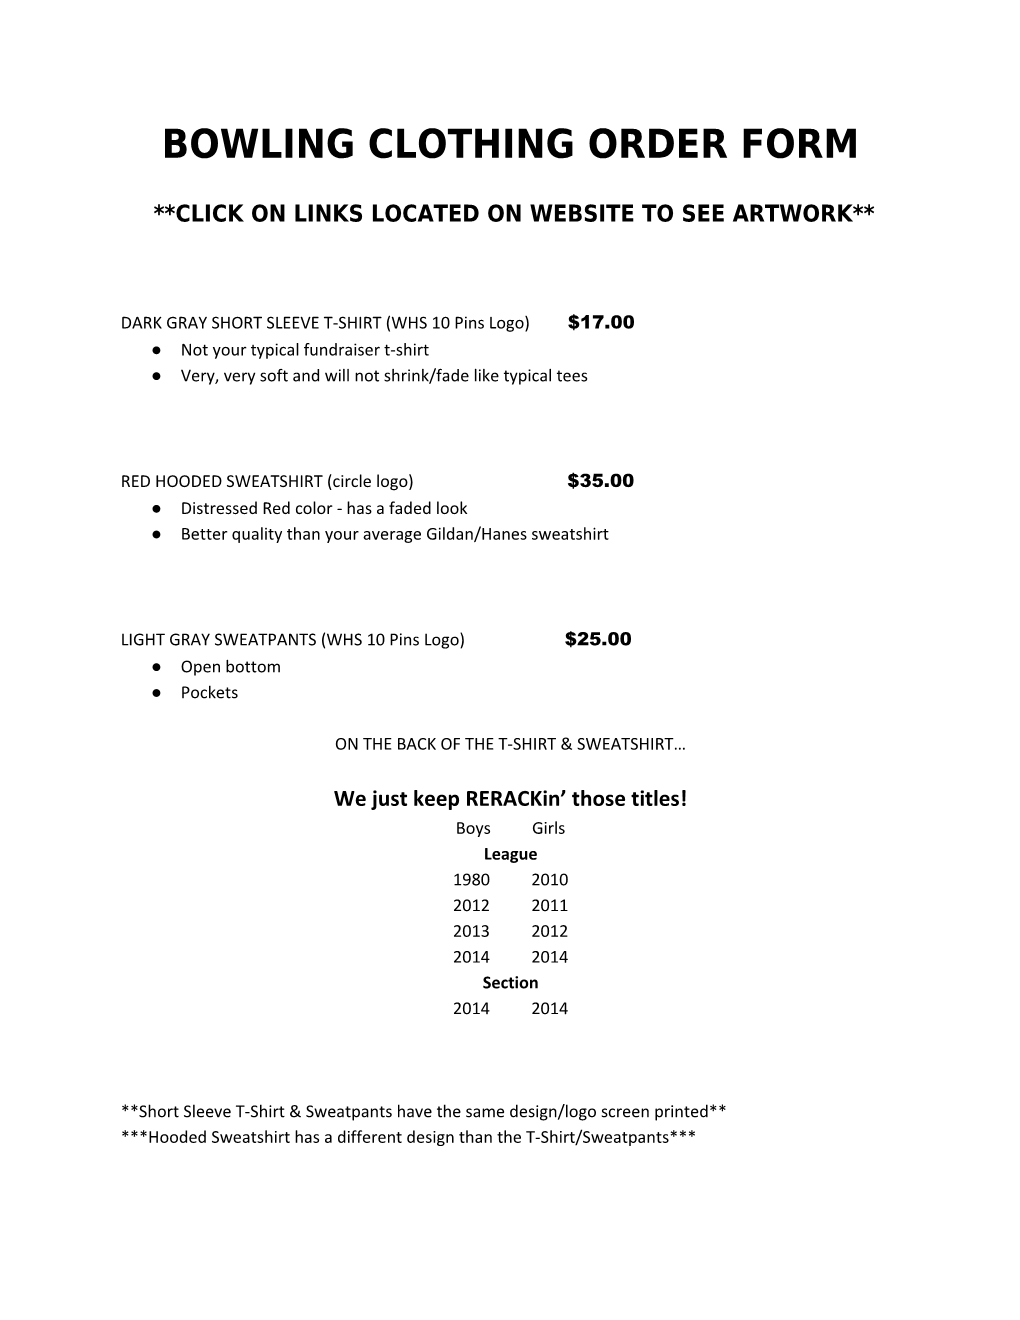 Bowling Clothing Order Form